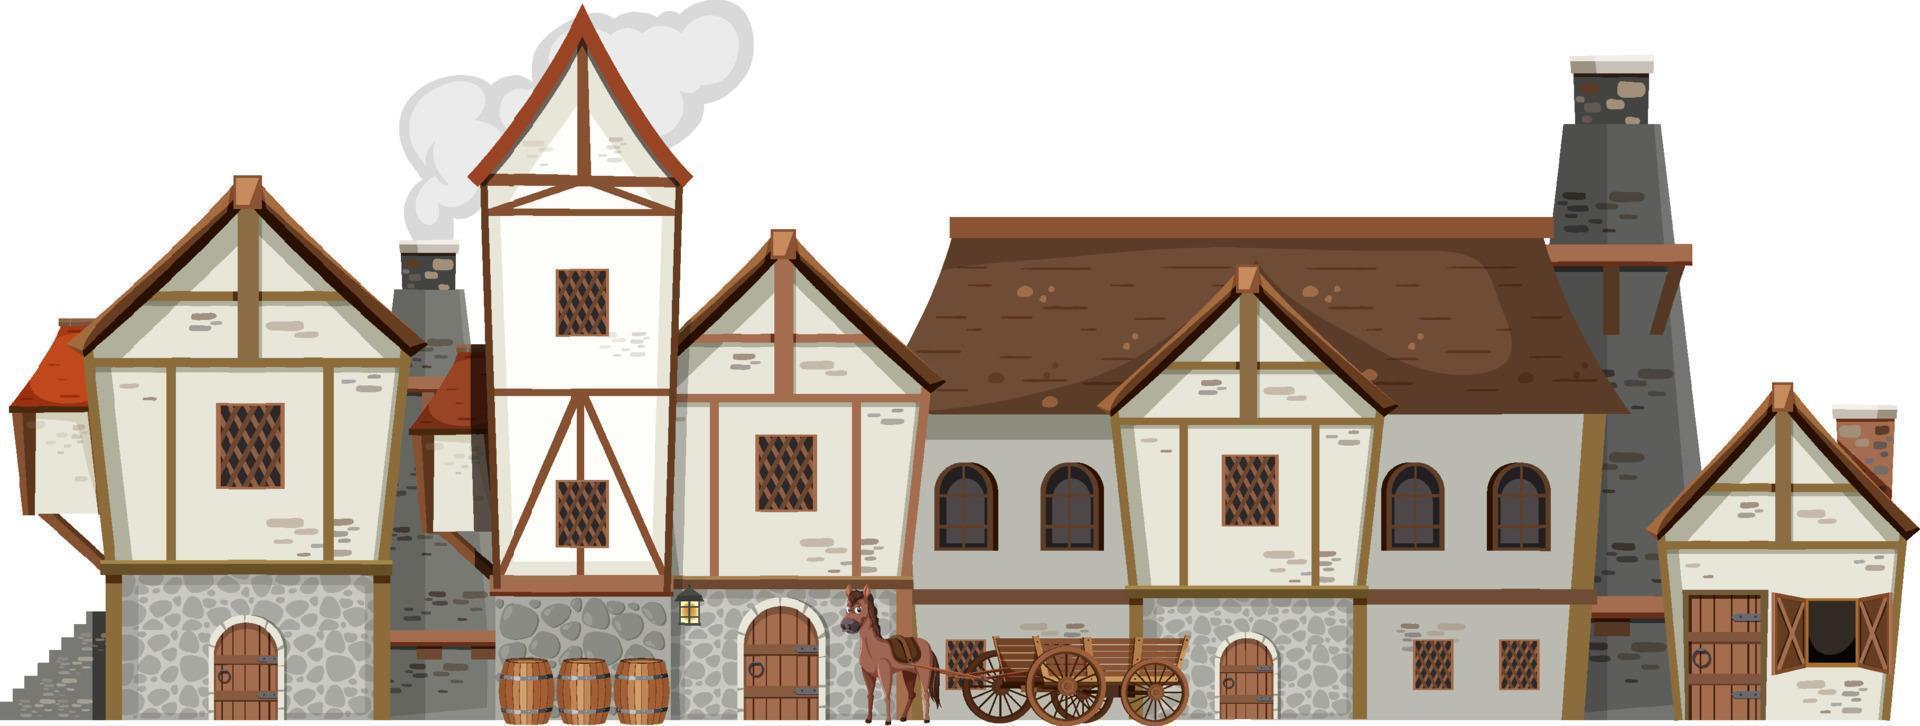 Medieval ancient building on white background vector